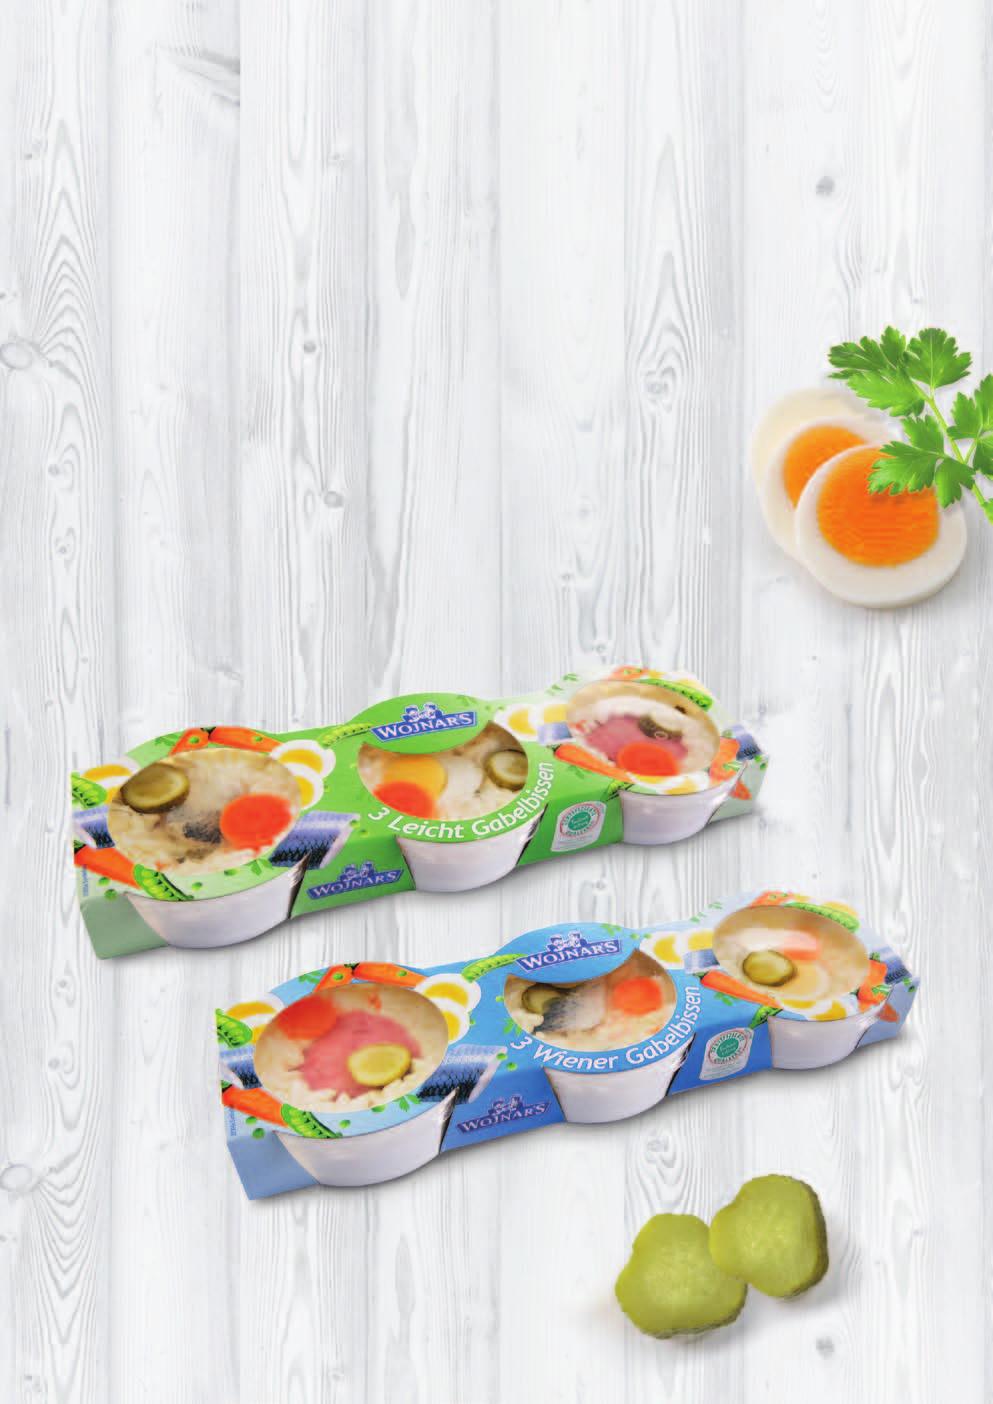 Gabelbissen Snack Pots An Austrian classic for that quick treat on the go. Unique worldwide, the tried and tested varieties of this speciality are also available in a handy 3-pack.